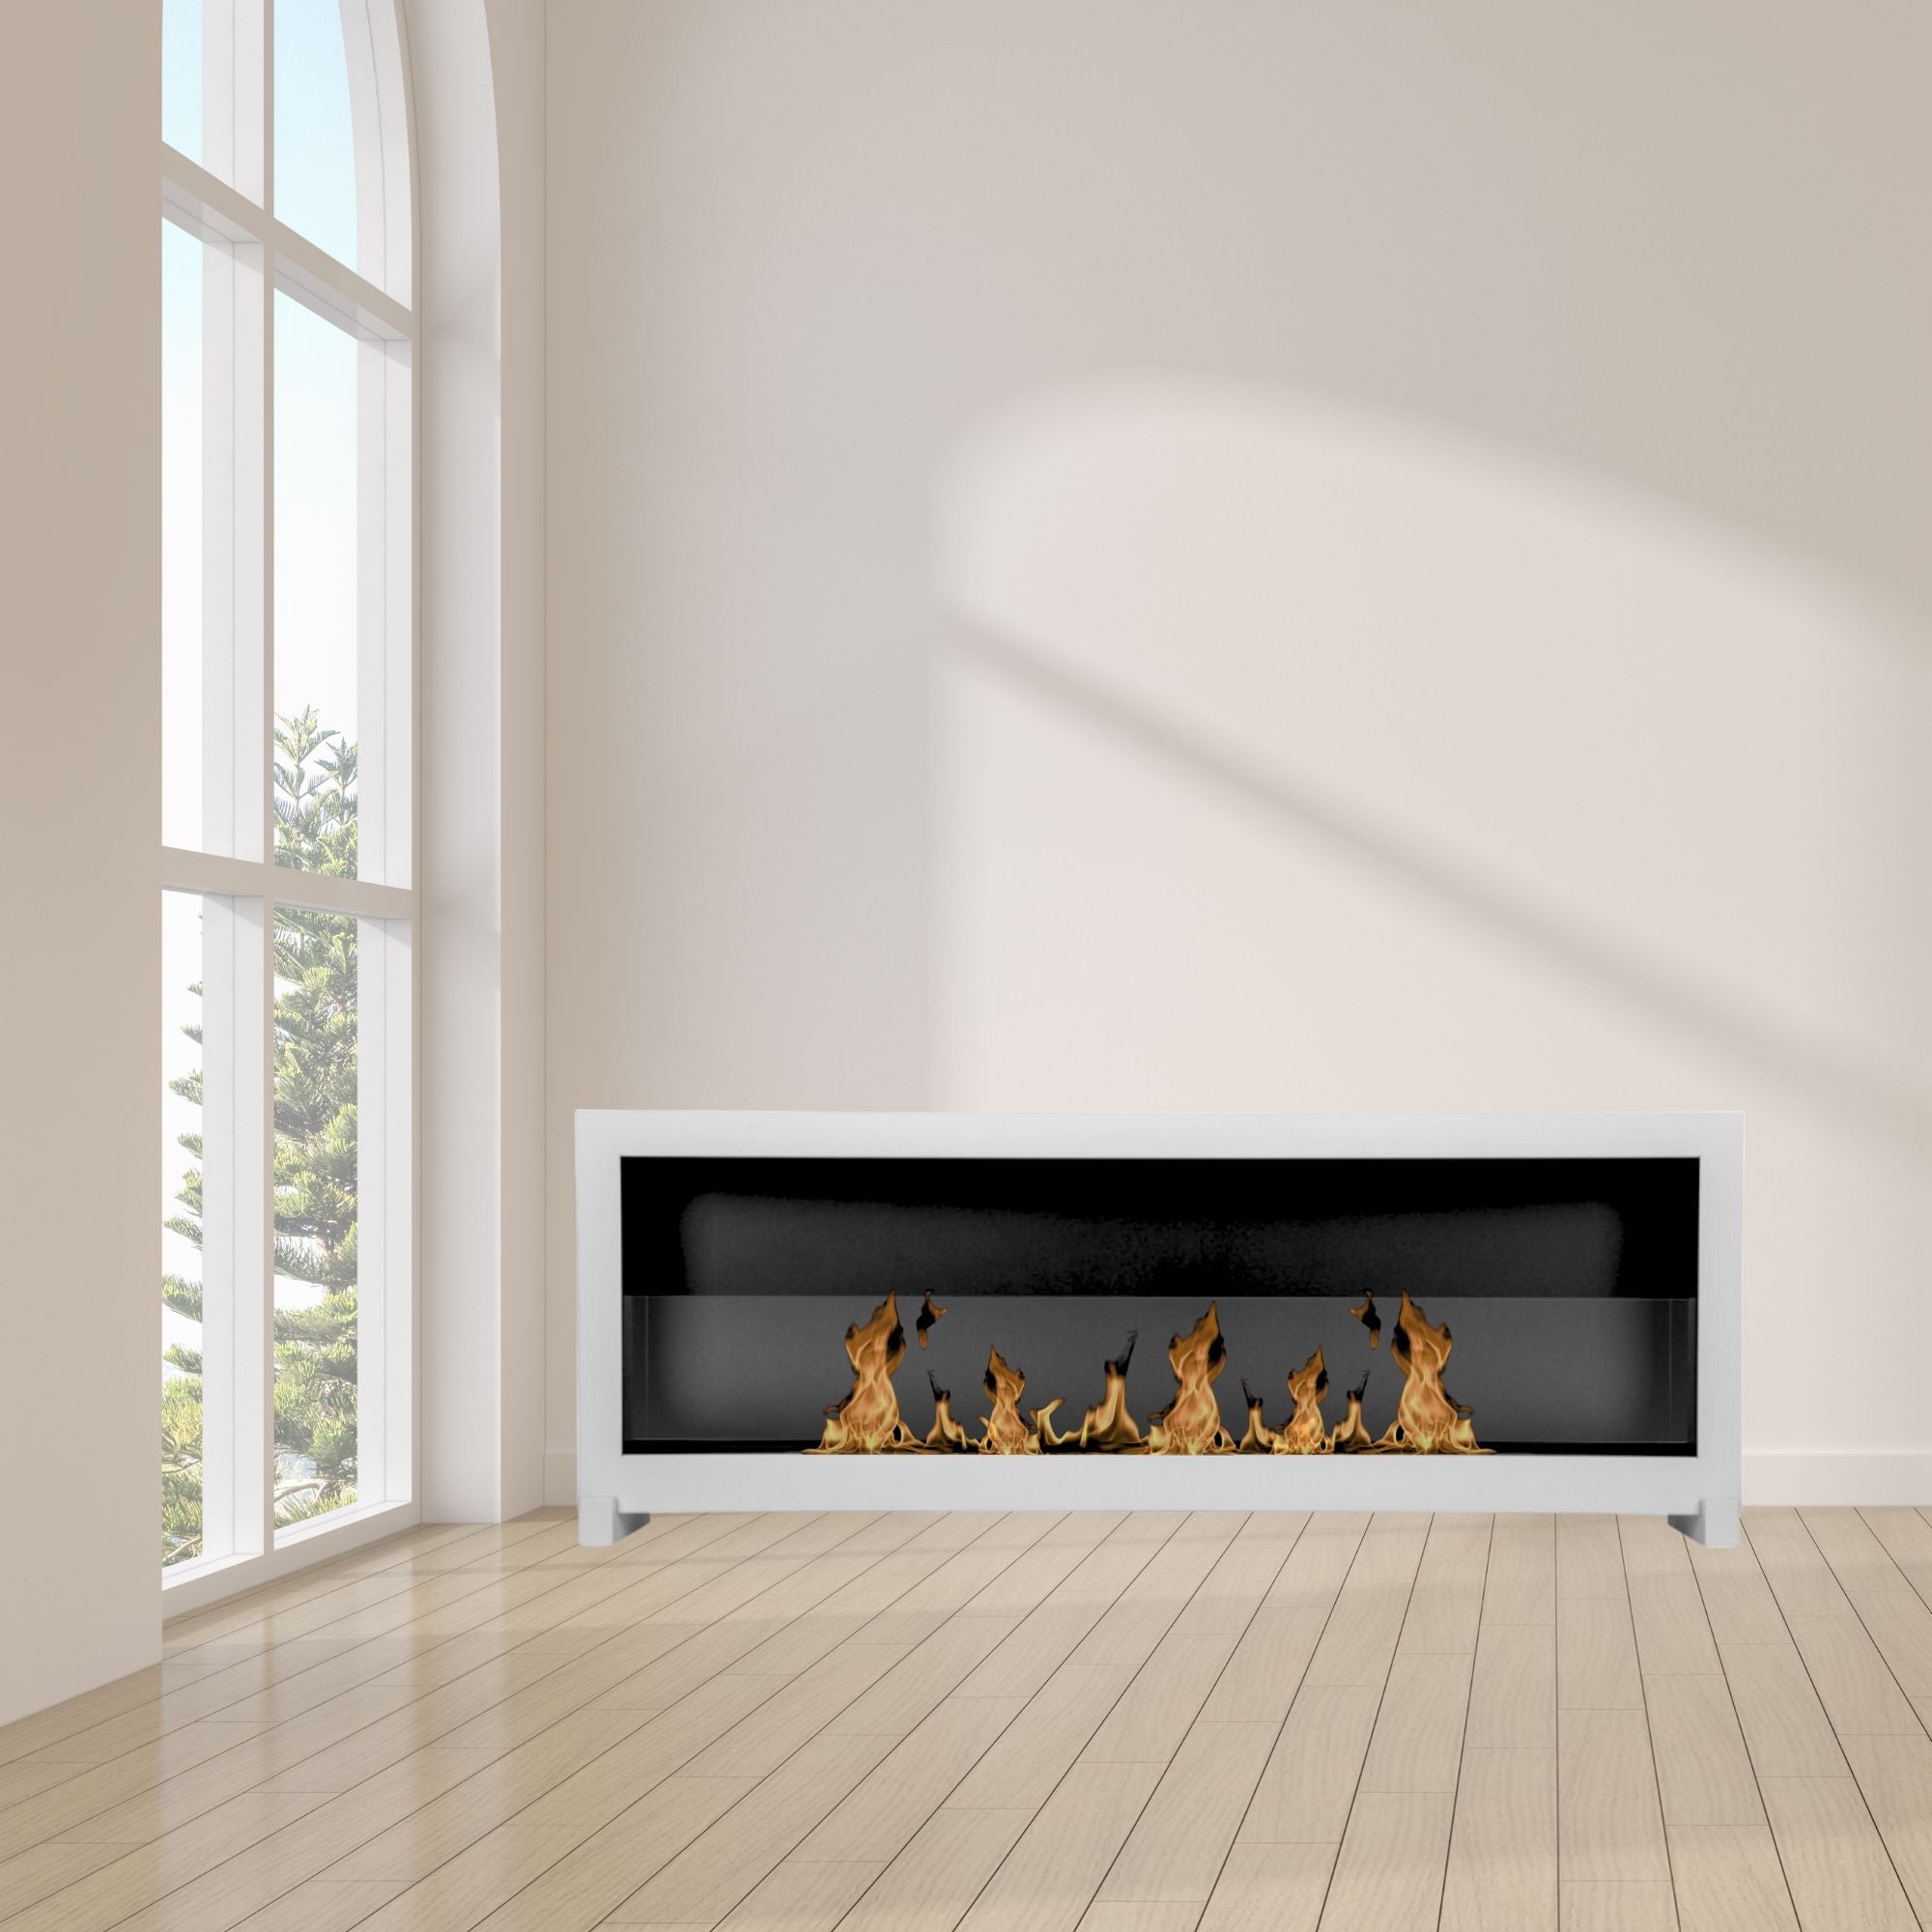 S - Line White Full BOX Wall Fireplace - Freestanding Bio-Ethanol 120 x 40 CM With Glass